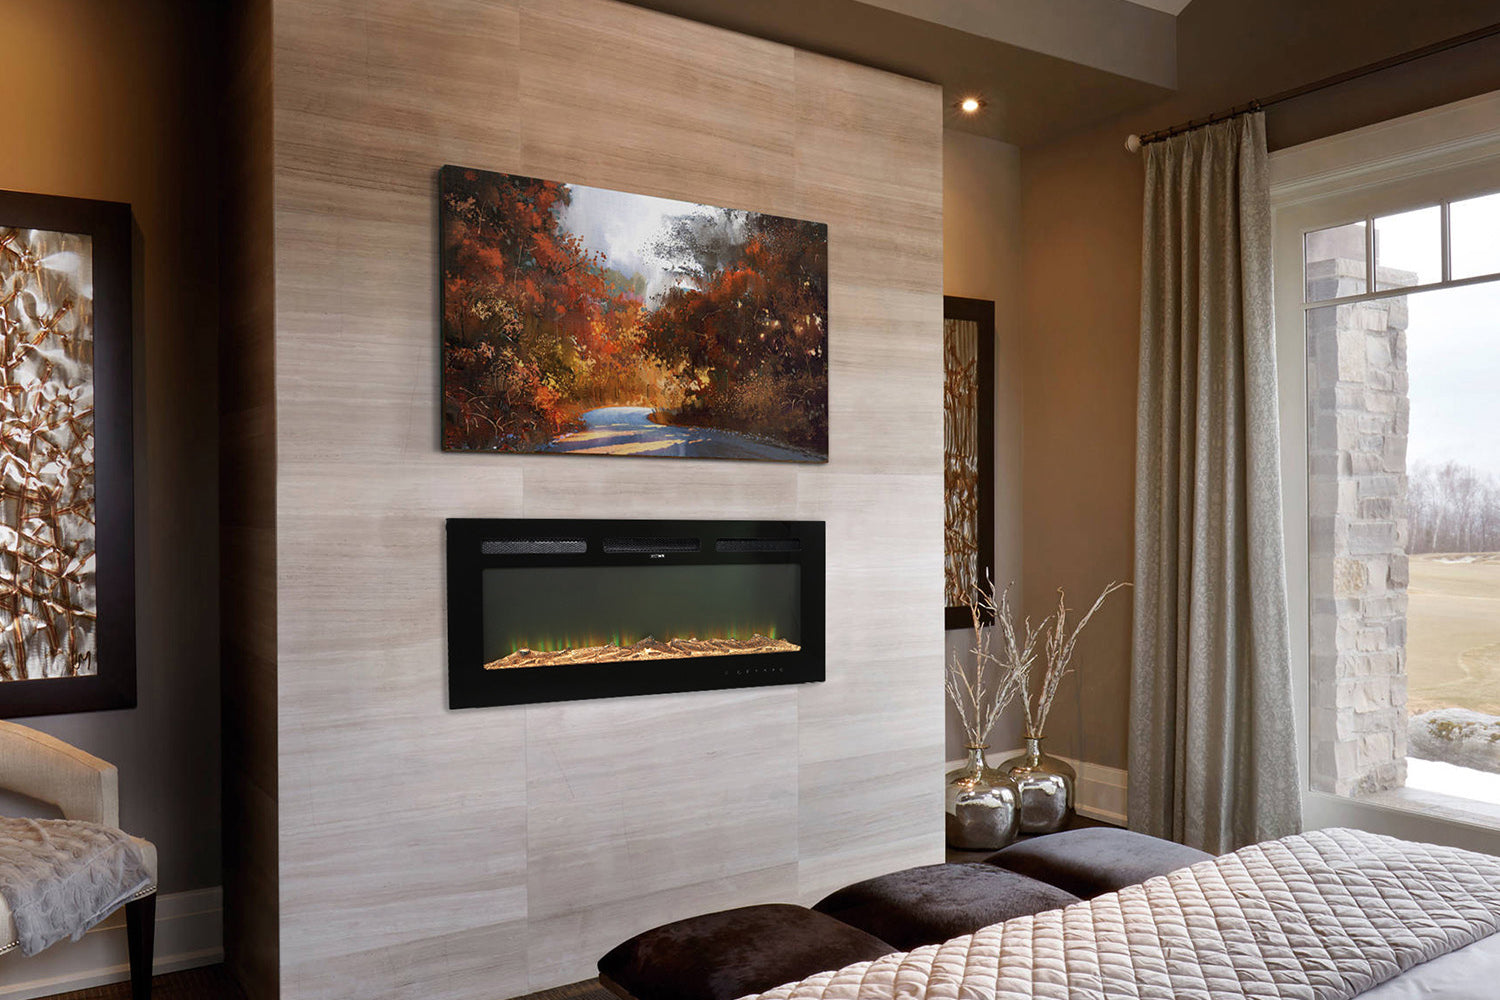 Some Features You Need to Considered When Selecting Your Electric Fireplace - Boyel Living